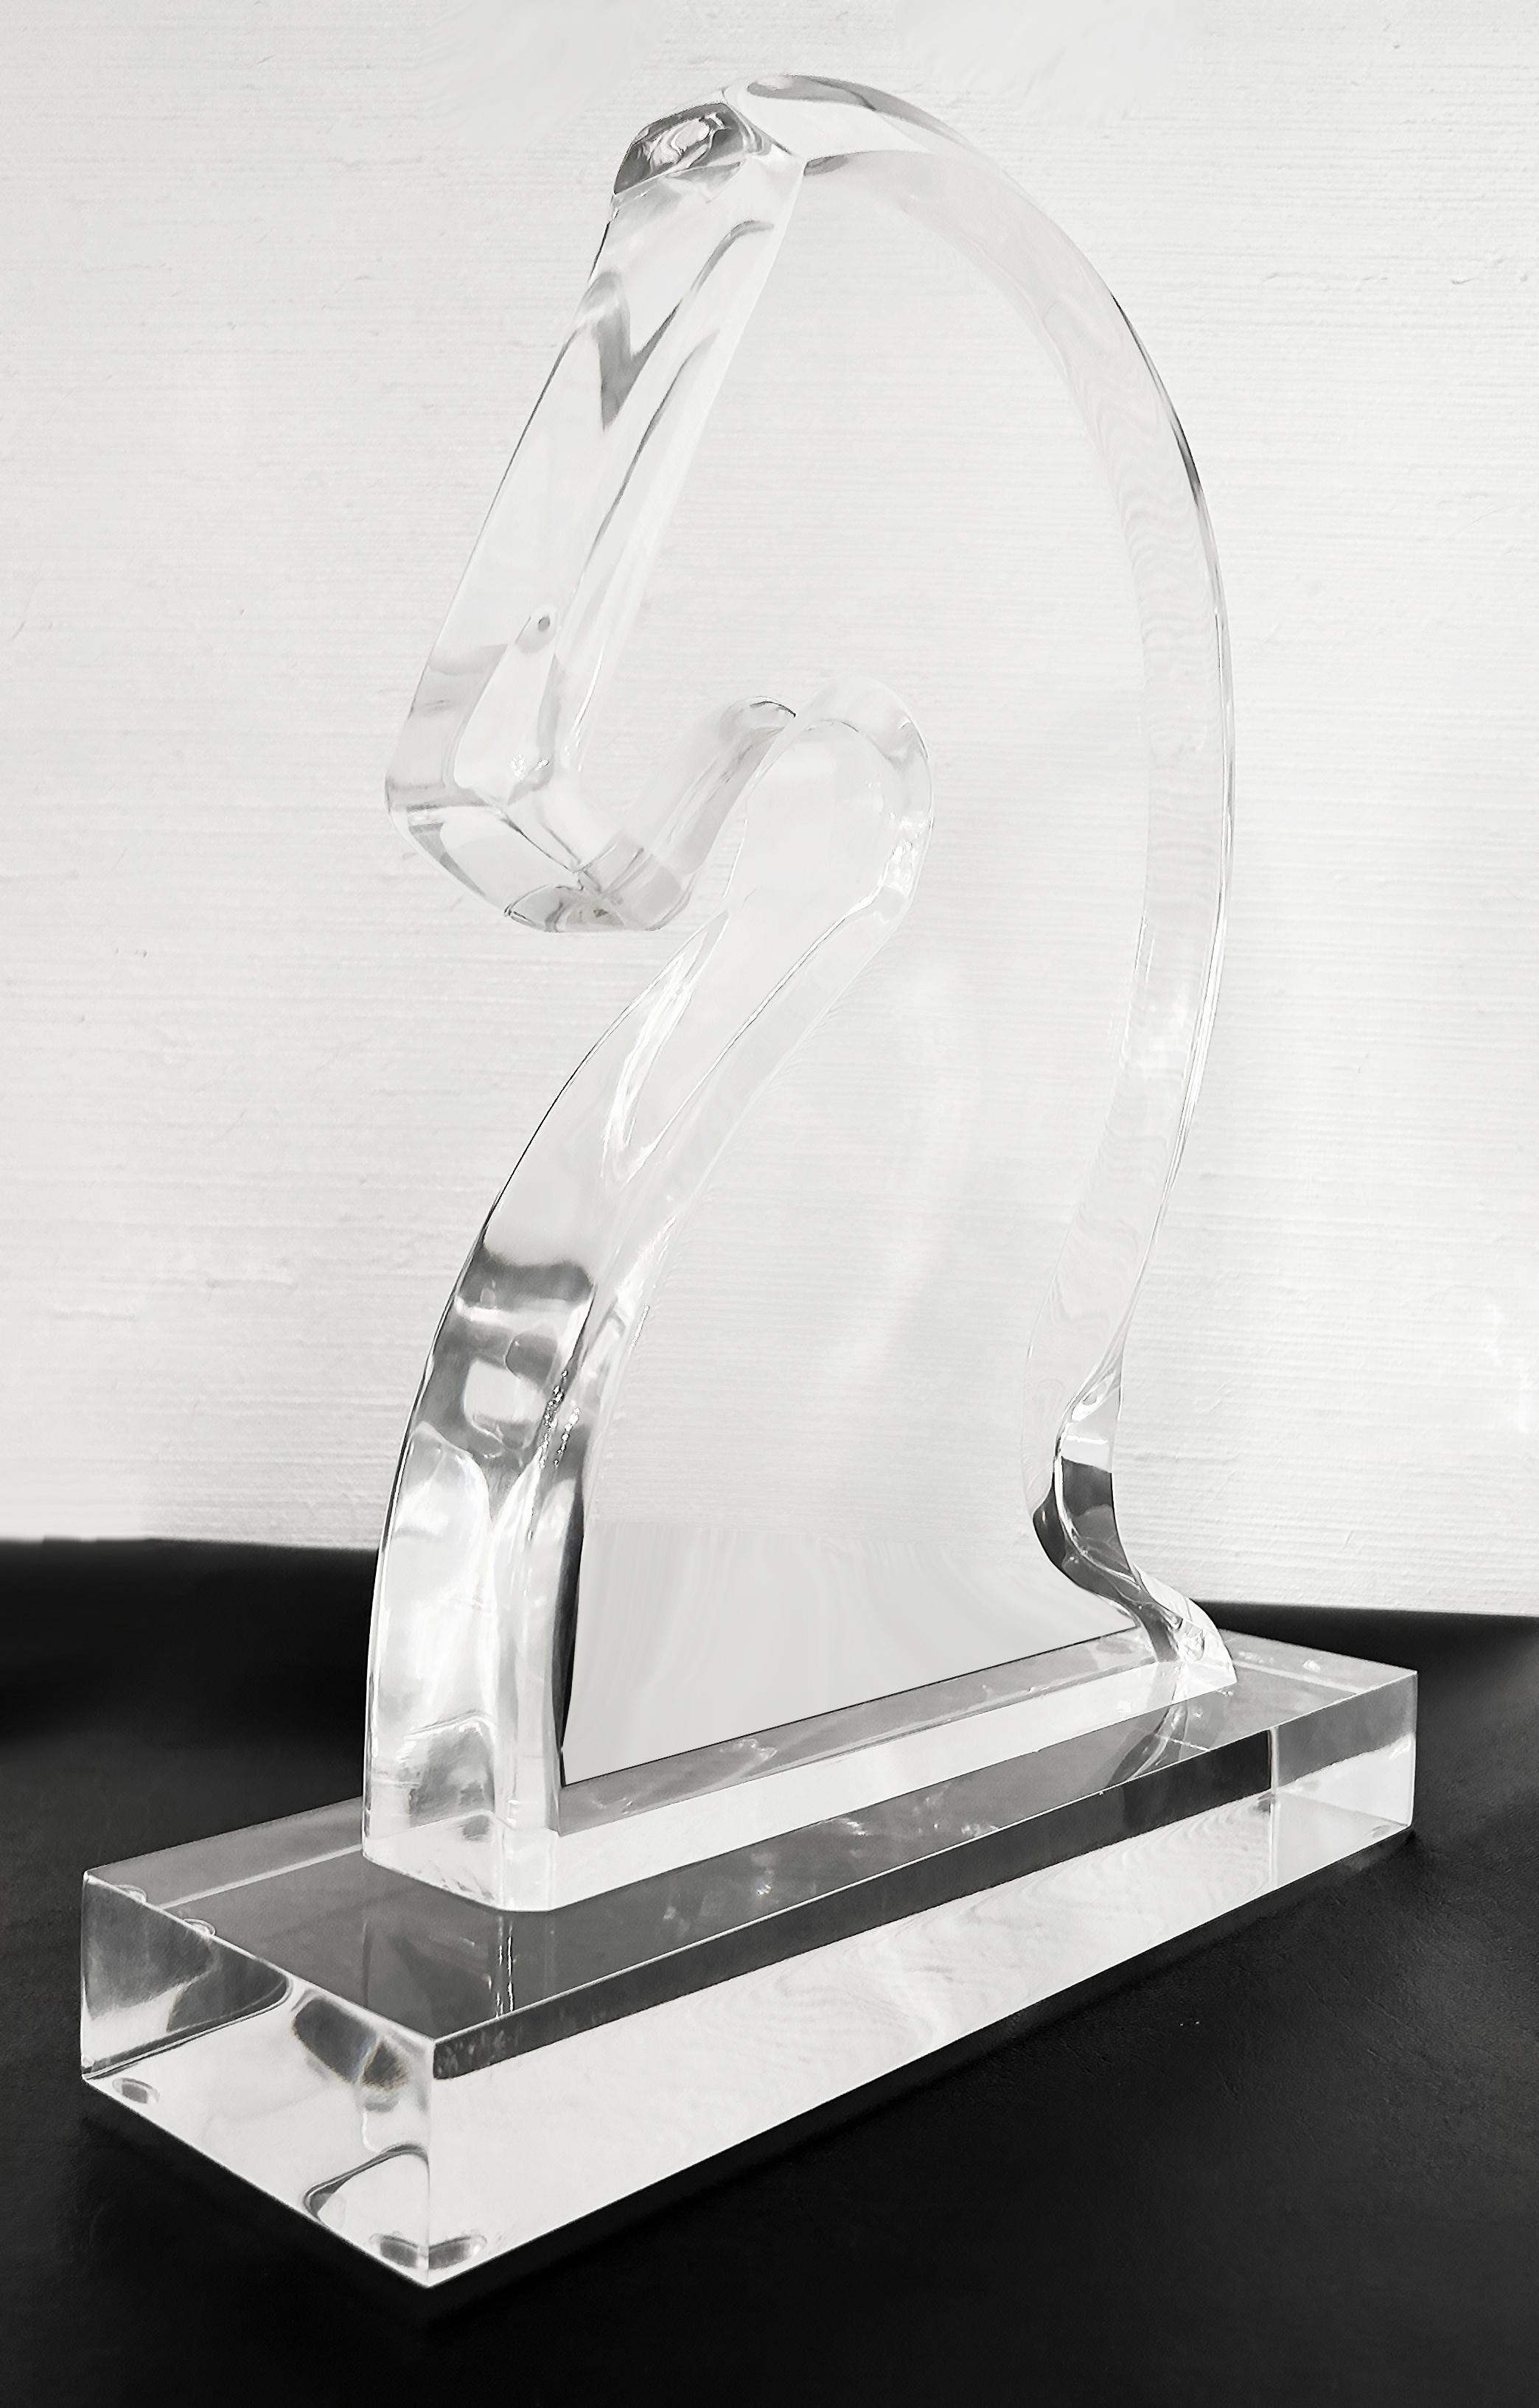 Trojan Horse Head or Knight Chess Piece Lucite Sculpture on a Base

Offered for sale is a wonderful custom made lucite sculpture of a stylized Trojan horse head on a rectangular lucite base.  This piece also resembles a knight chess piece.   

Horse